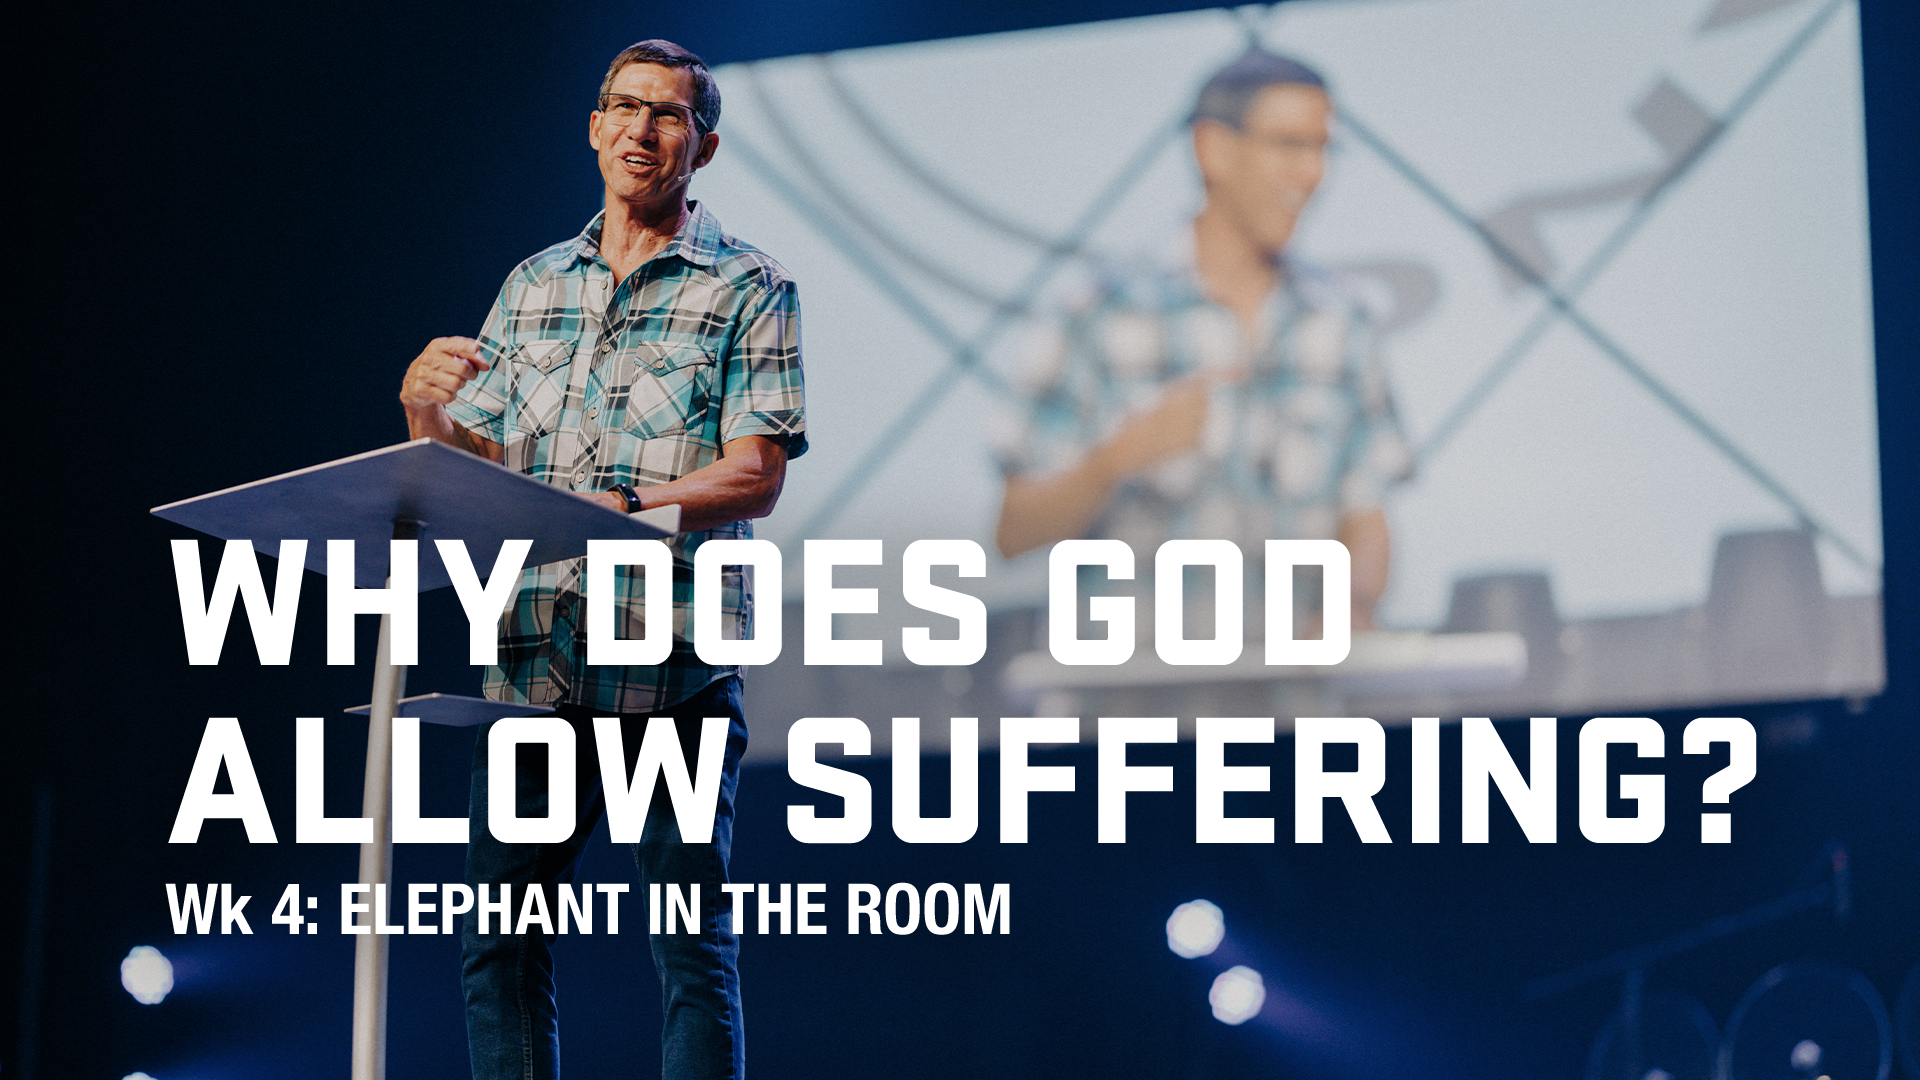 Image: Why Does God Allow Suffering?